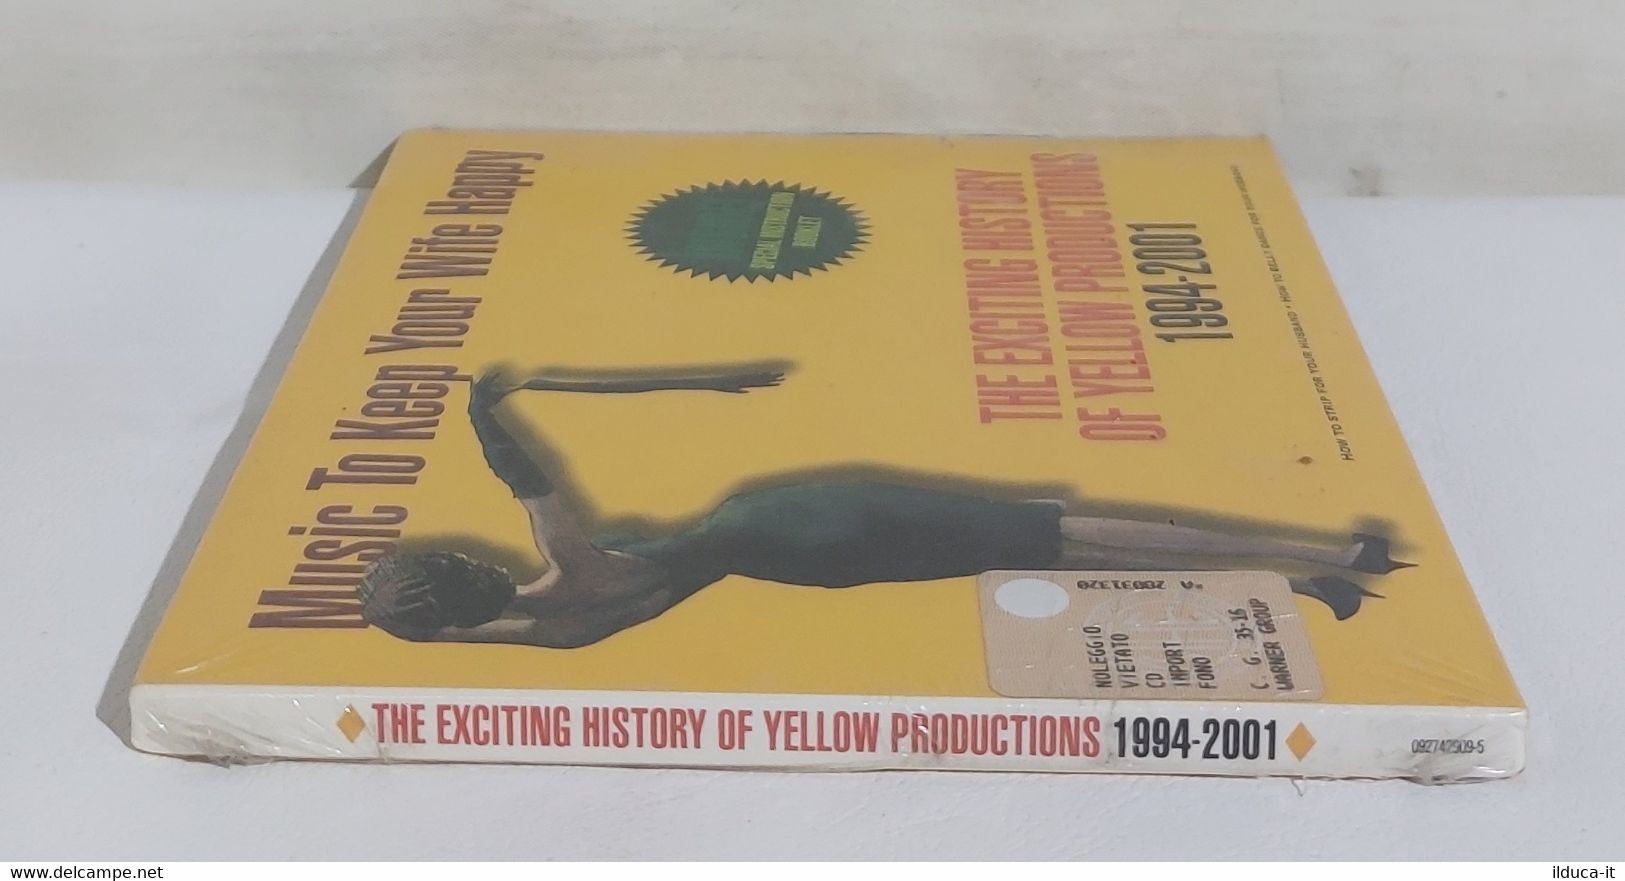 I109213 CD - The Exciting History Of Yellow Productions 1994-2001 - SIGILLATO - Dance, Techno & House